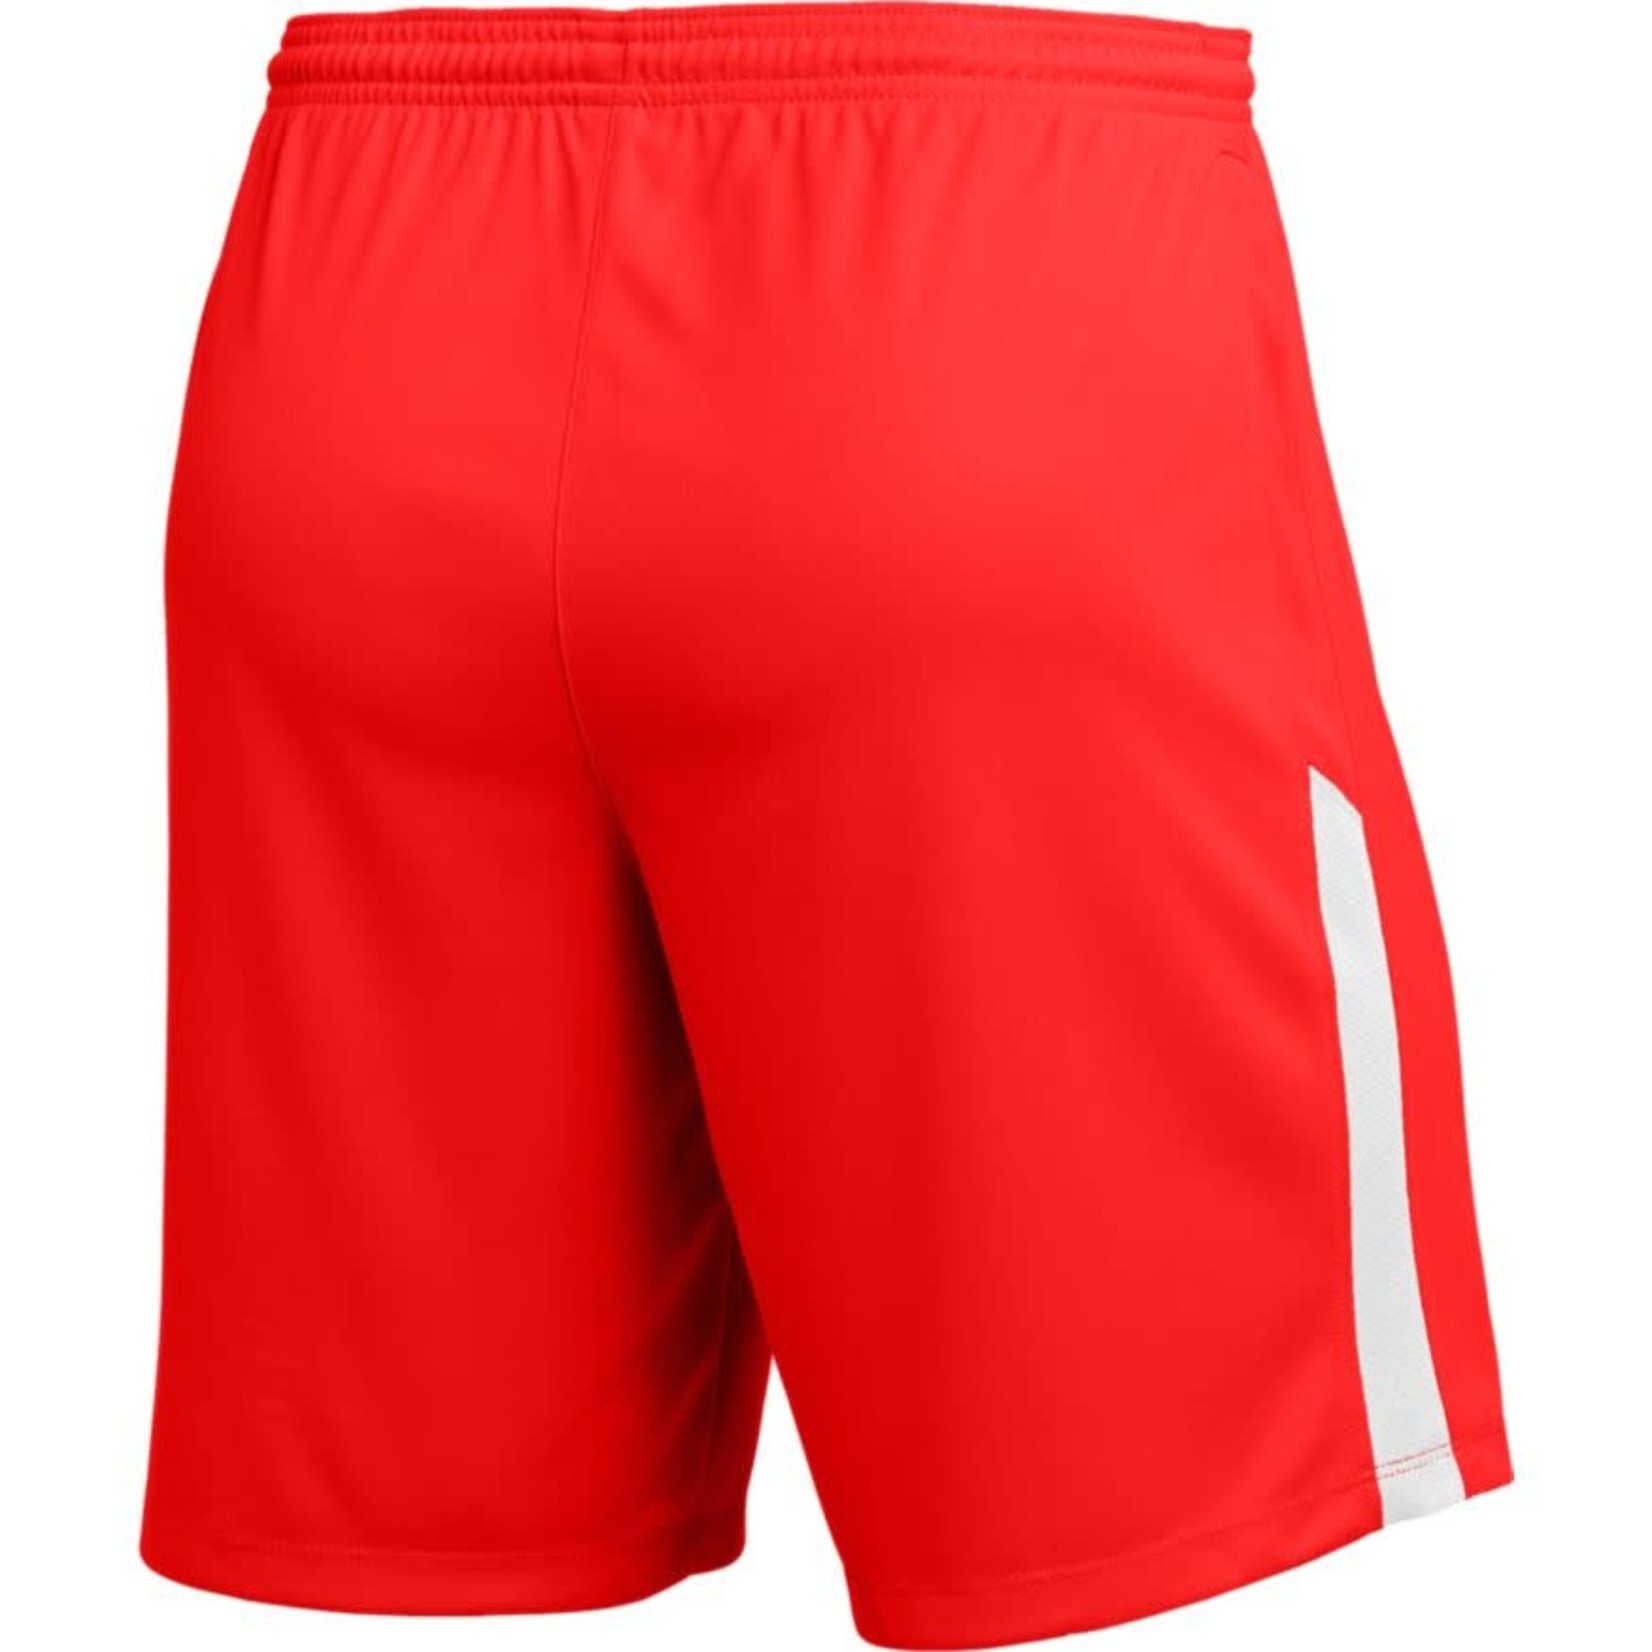 NIKE LEAGUE KNIT II SHORT YOUTH (RED)